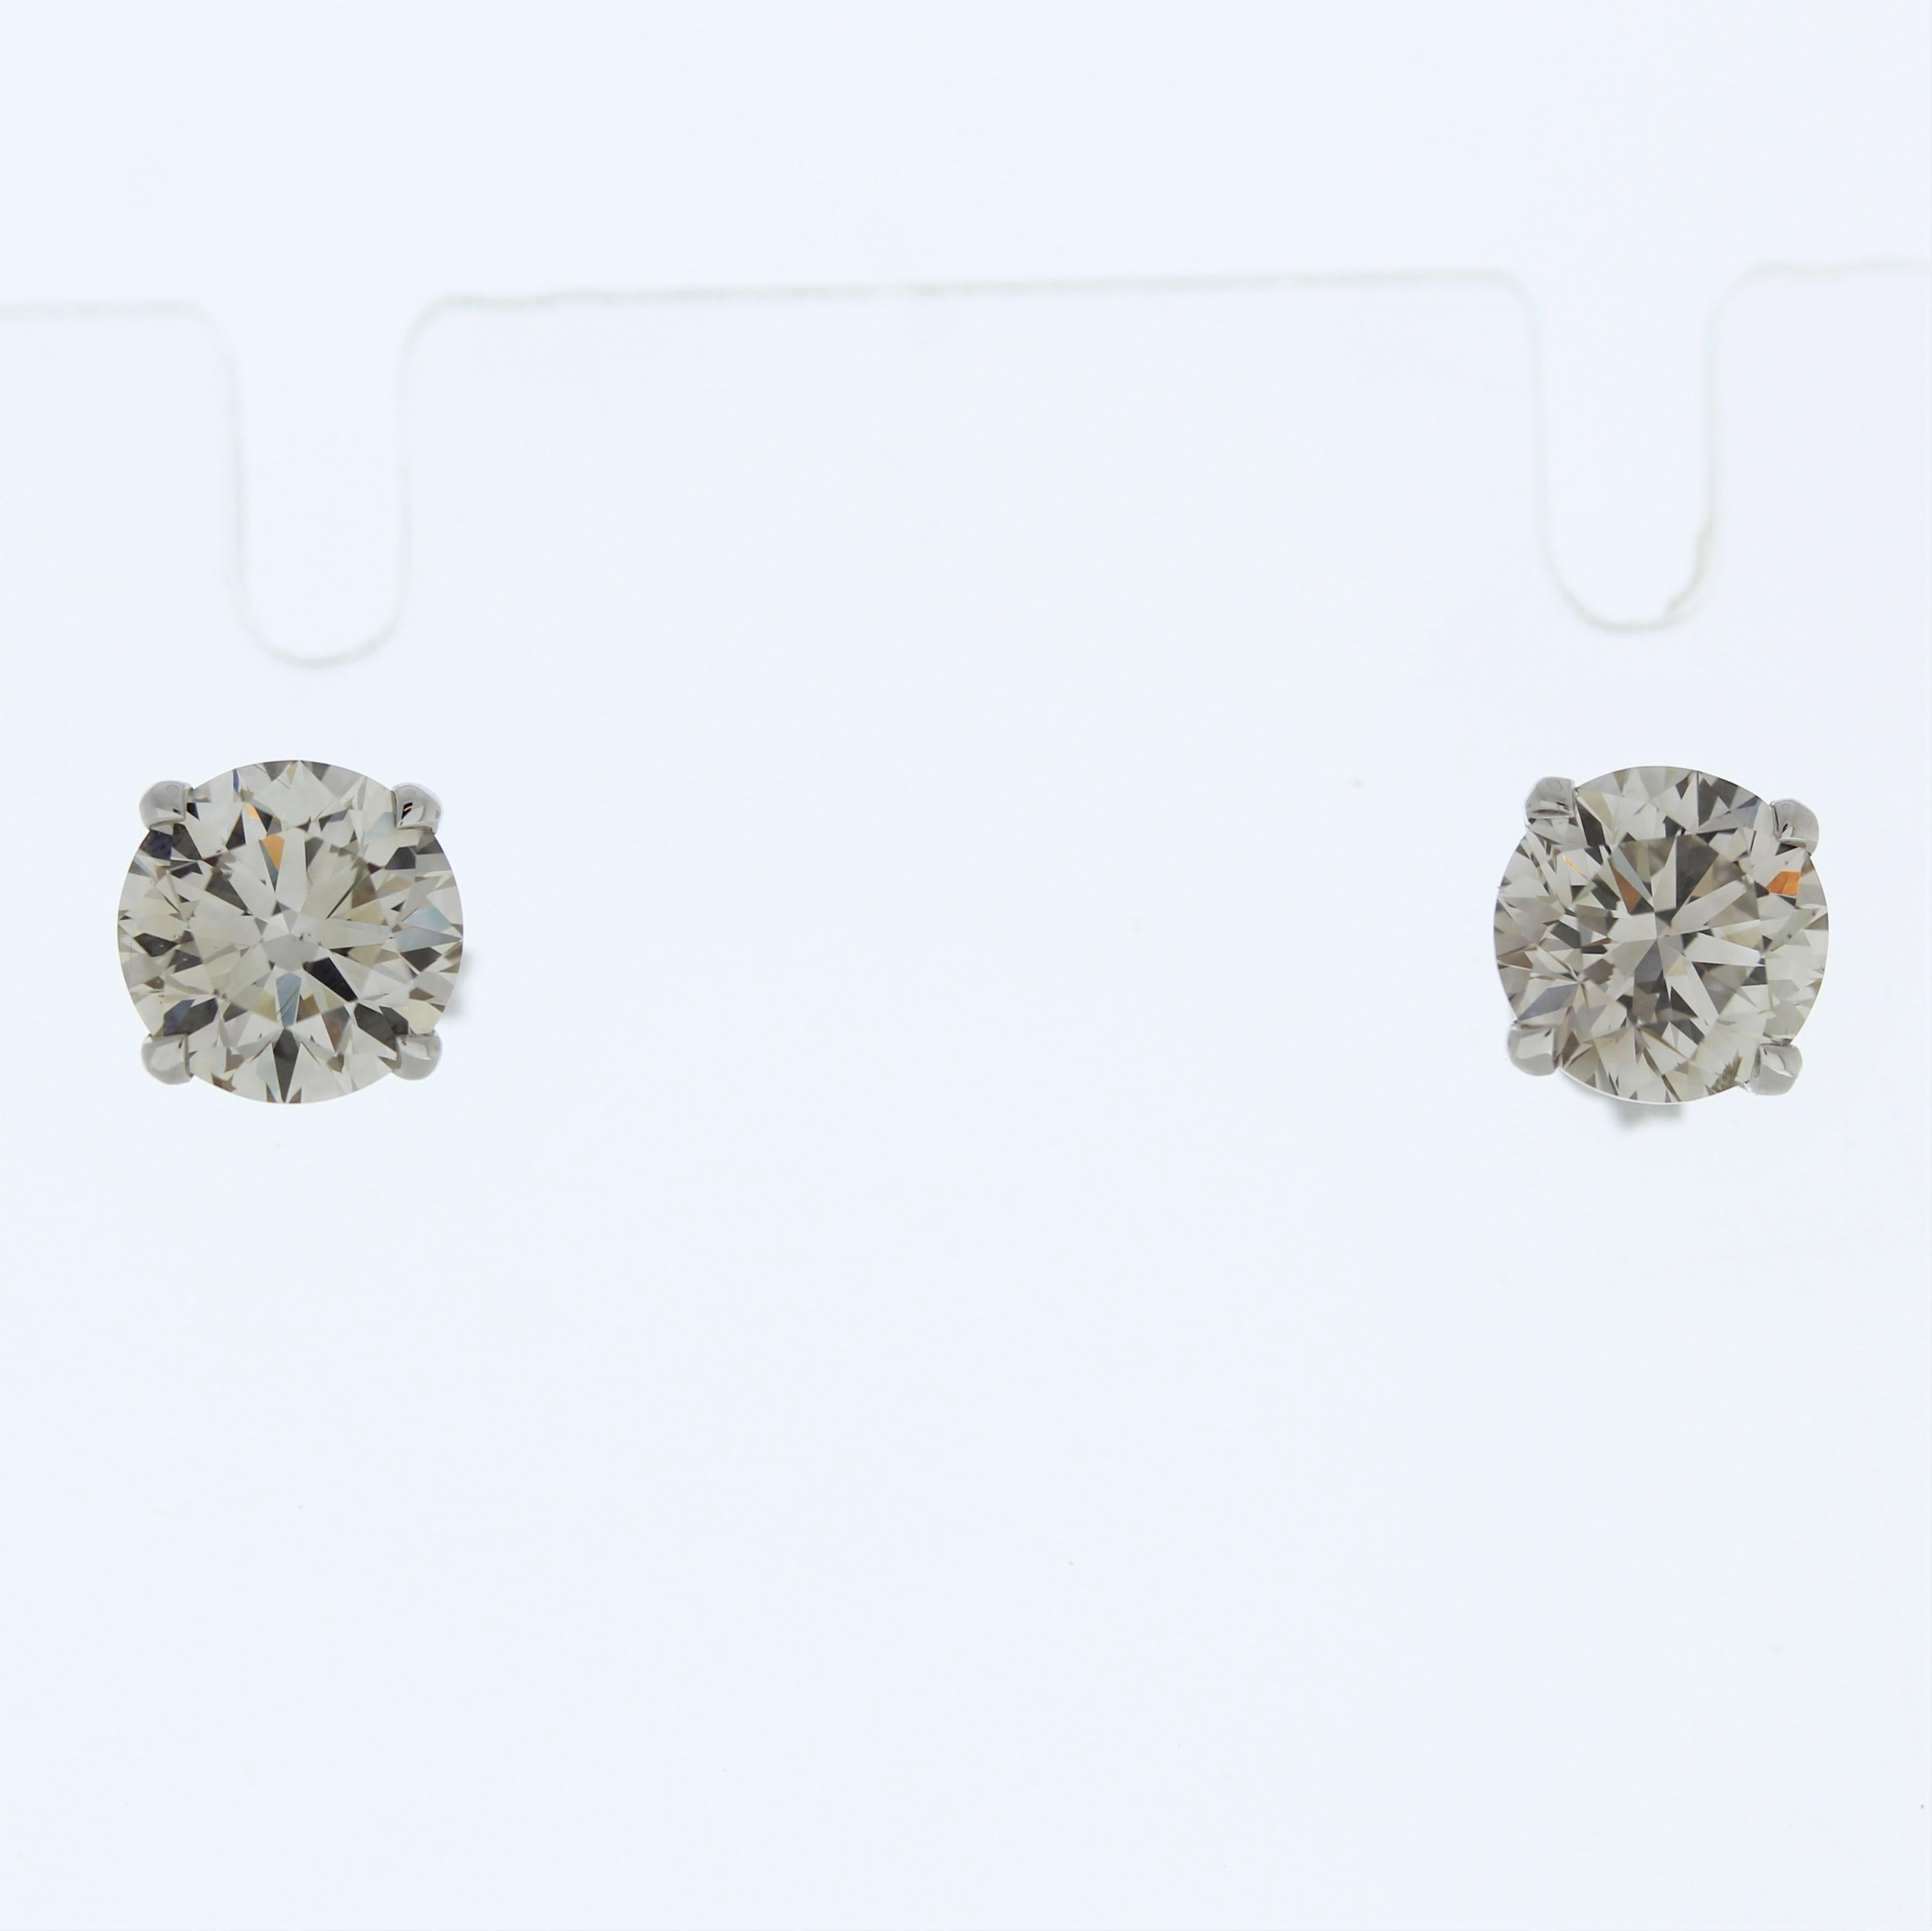 Contemporary 3.01 Total Carat Weight EGL Certified Round Diamond Studs In 14k White Gold For Sale